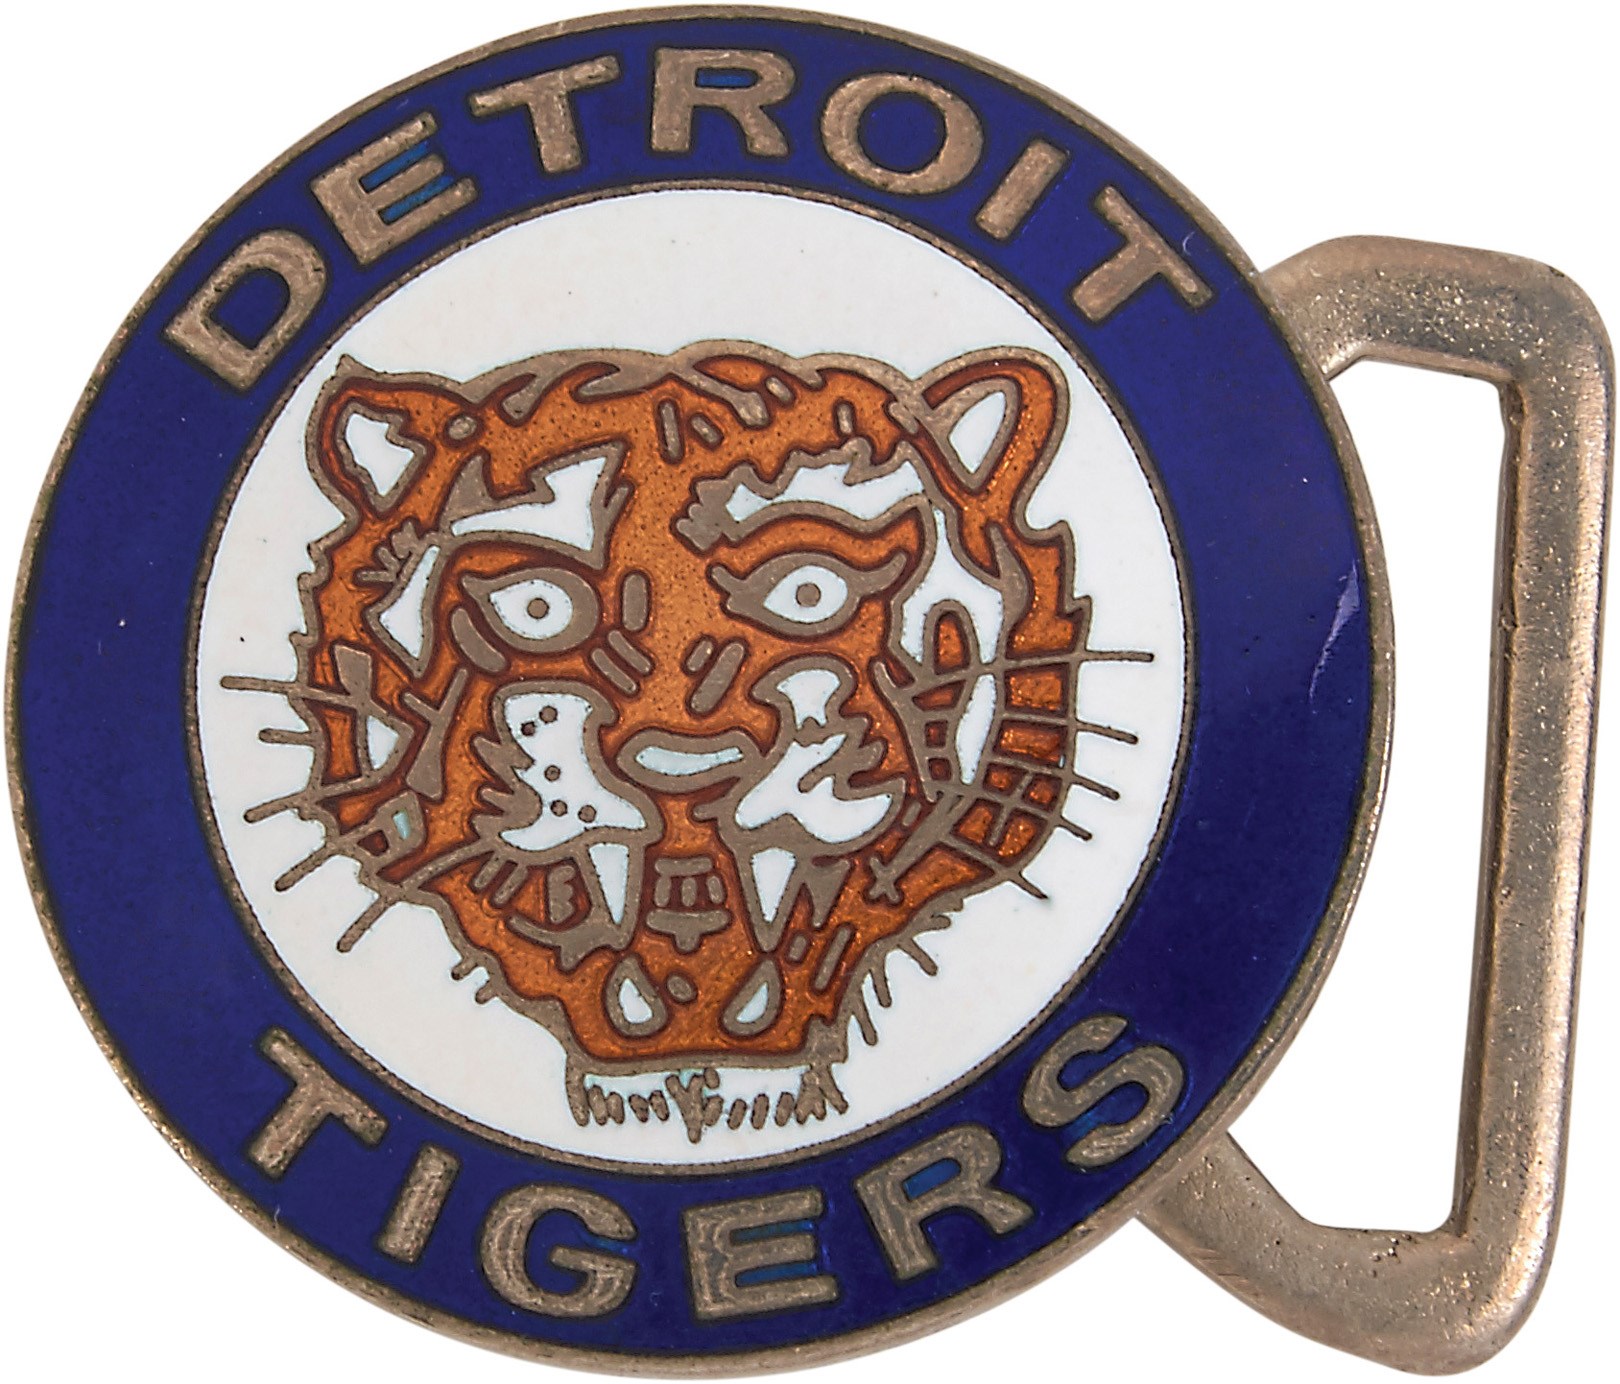 Ty Cobb and Detroit Tigers - 1962 Detroit Tigers Tour of Japan Belt Buckle in Original Box